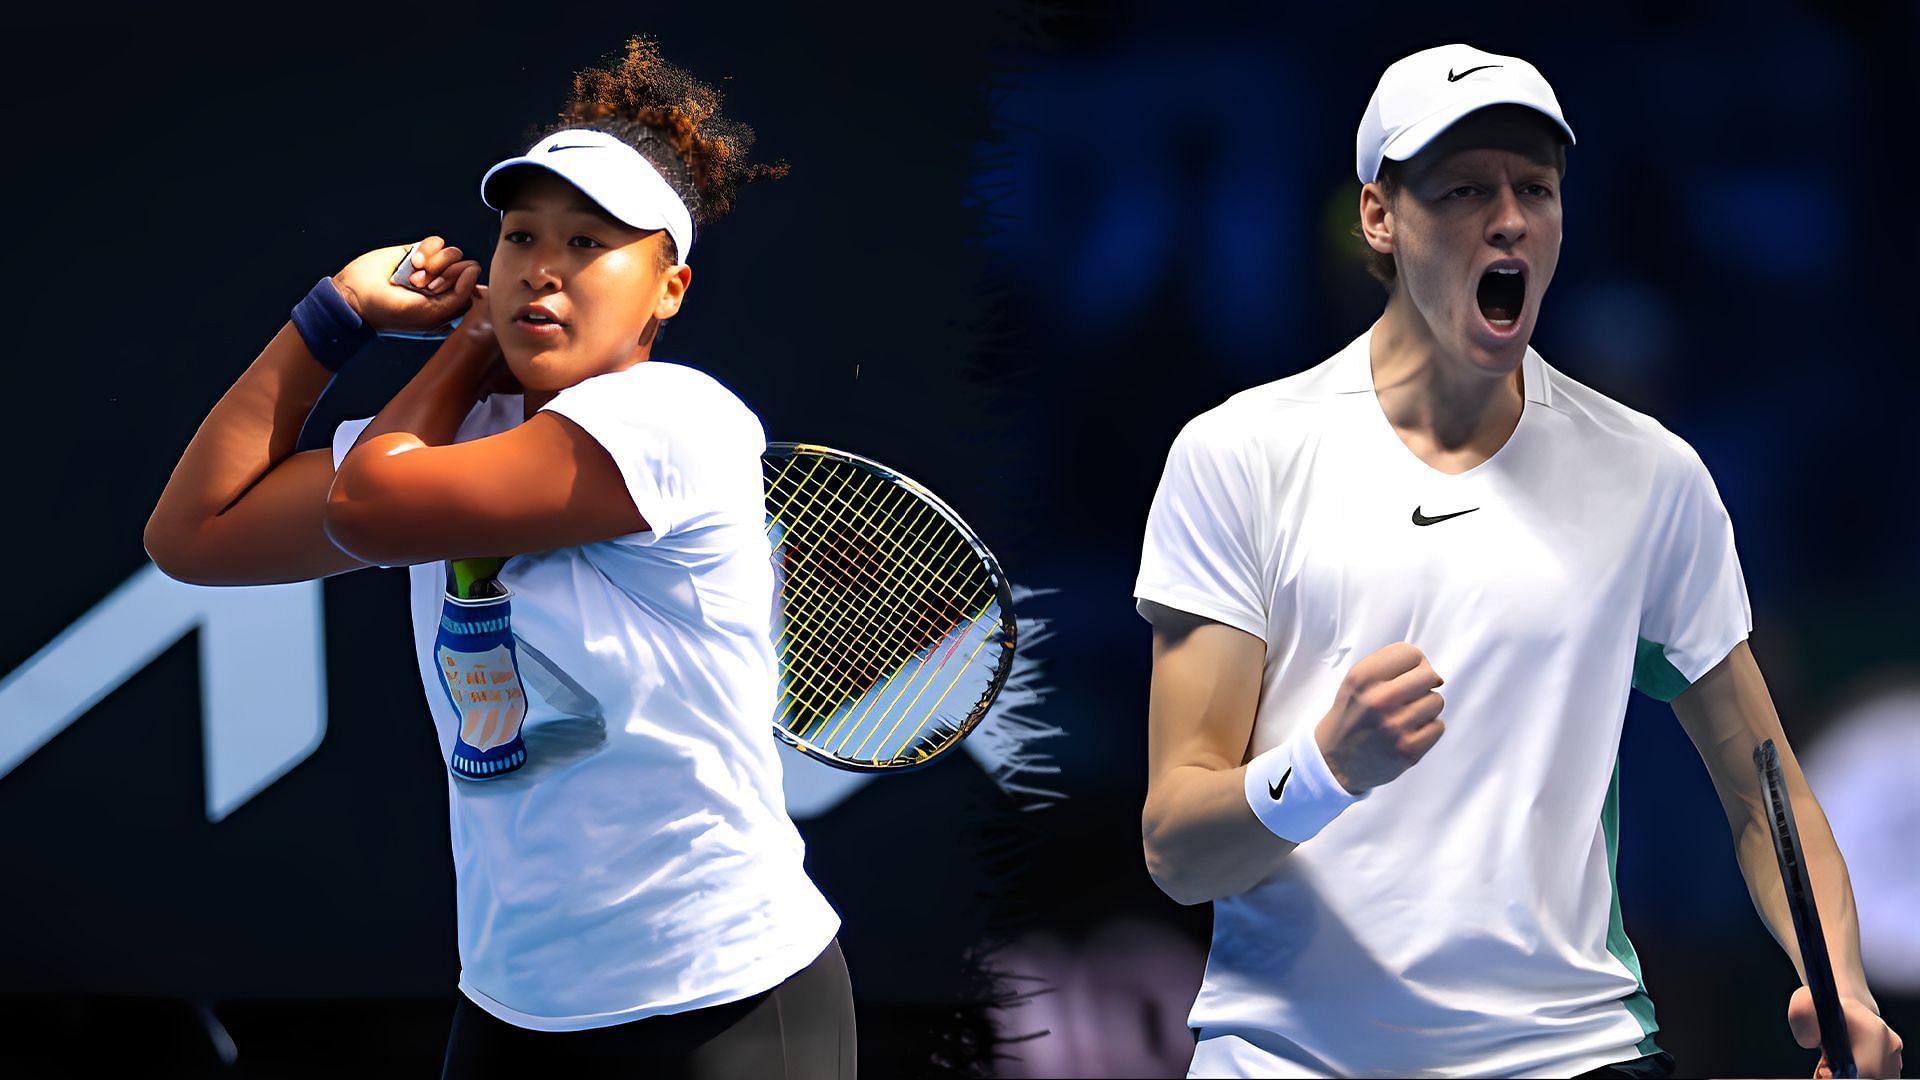 Naomi Osaka and Jannik Sinner will be in action on Wednesday at their respective tournaments.